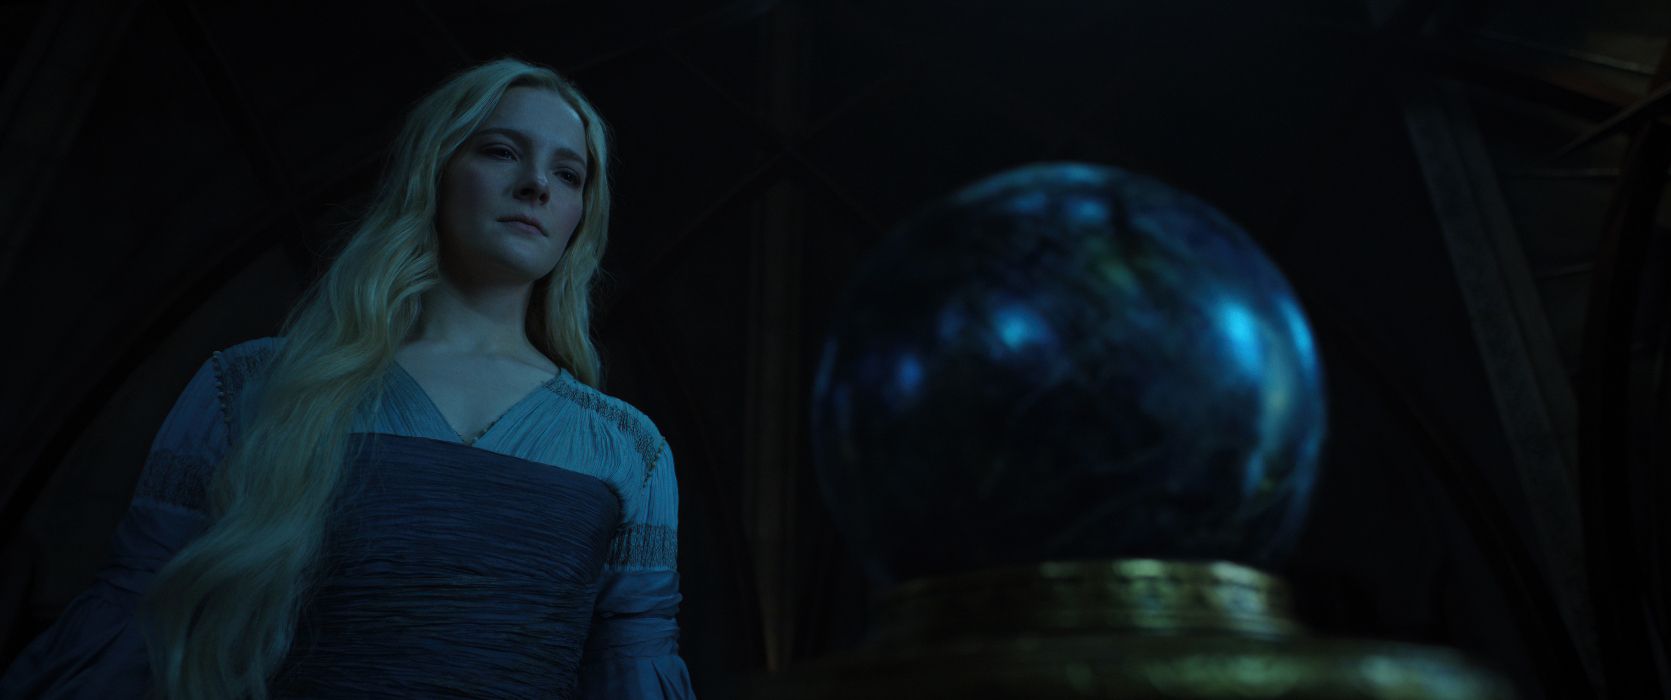 lord-of-the-rings-the-rings-of-power-galadriel-nieuwe-trailer-prime-video